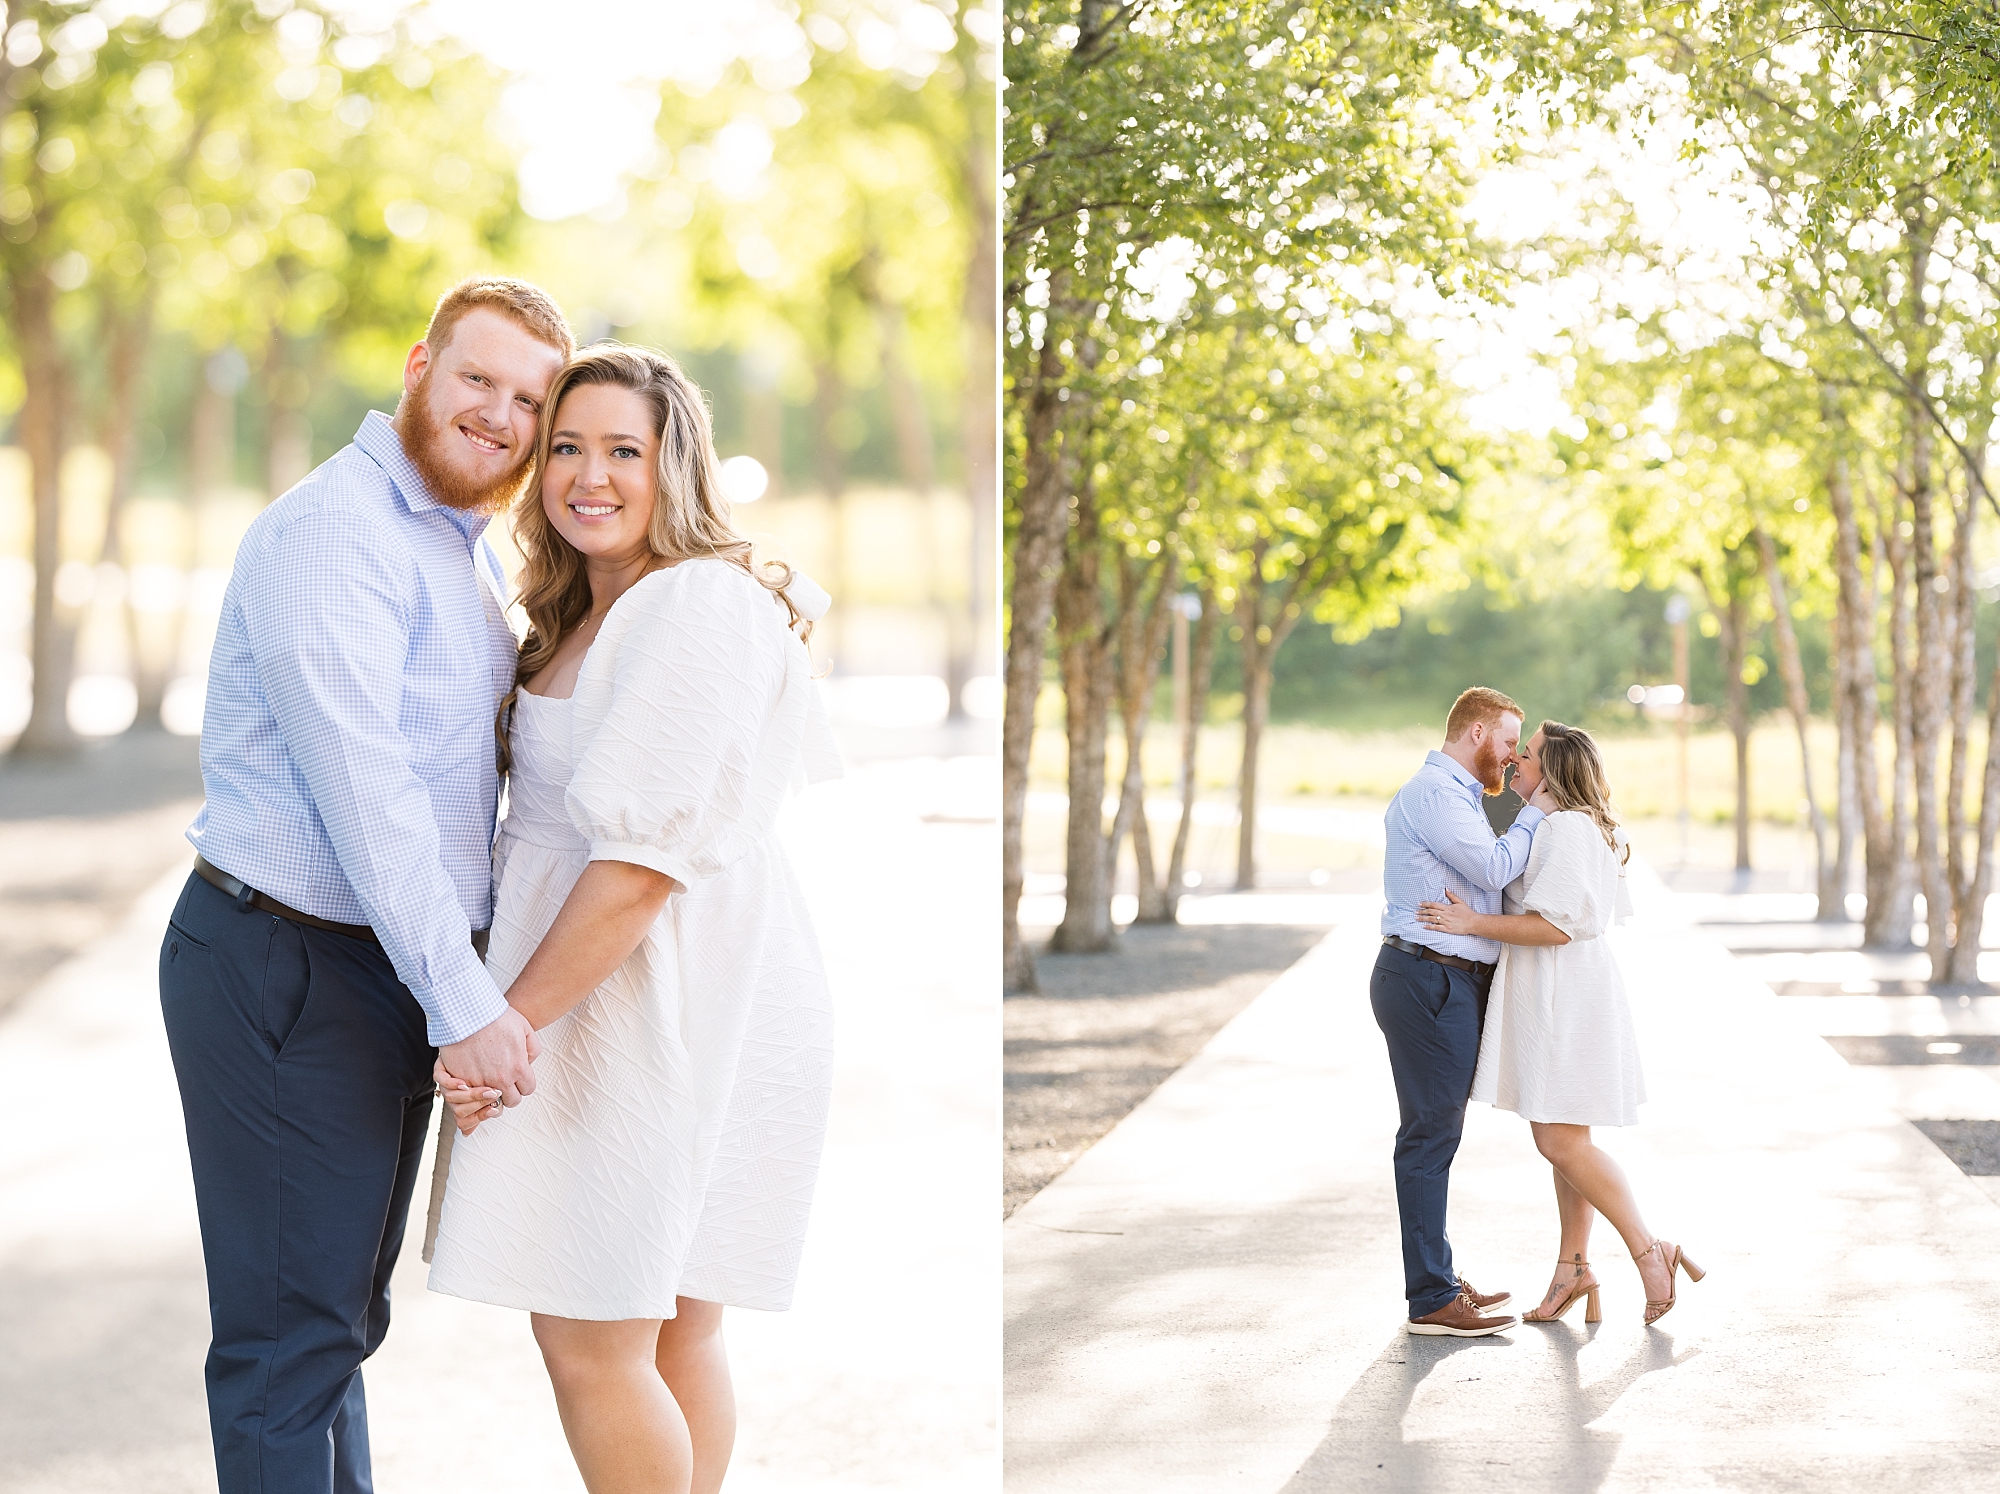 Golden hour engagement session | Raleigh NC Engagement Photographer